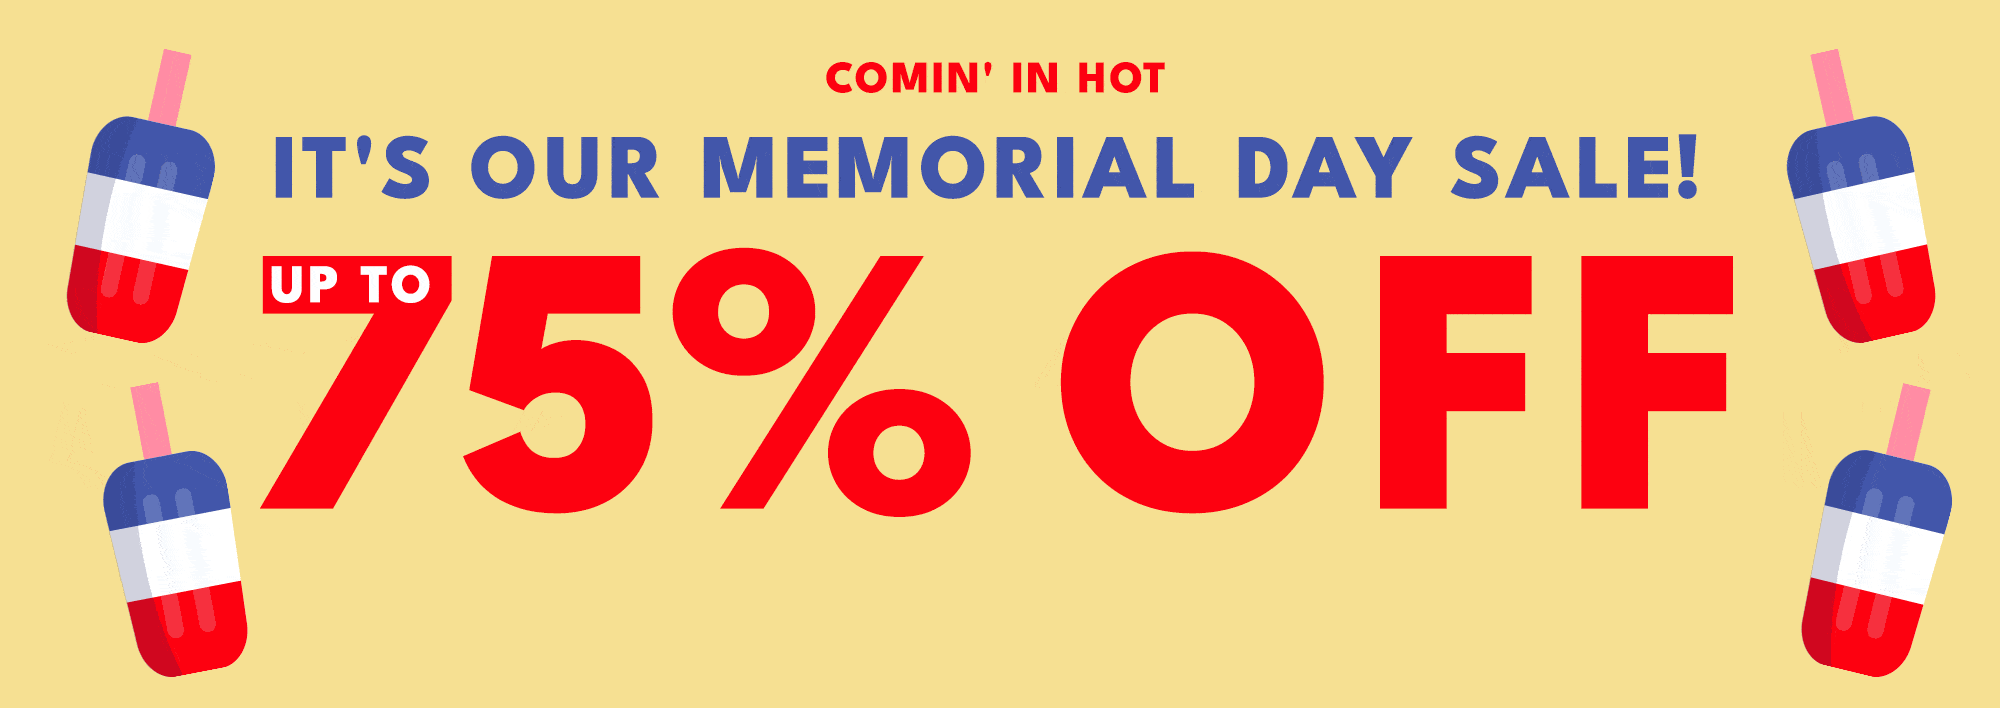 Comin' in hot it's our memorial day sale! up to 75% off shop the sale